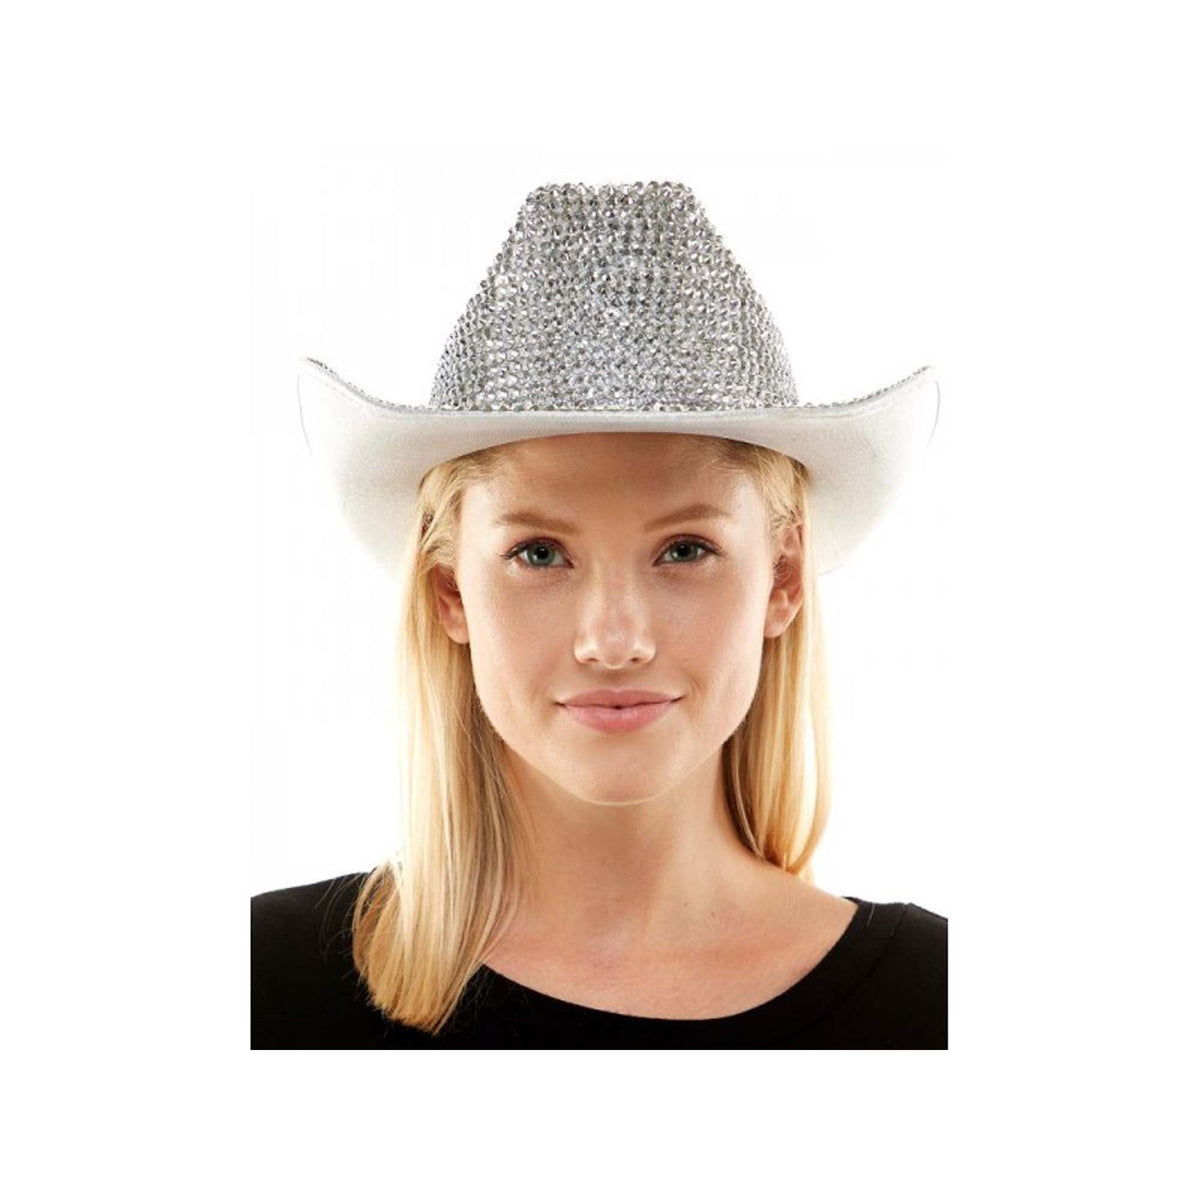 KBW GLOBAL CORP Costume Accessories Silver Rhinestone Cowboy Hat for Adults, 1 Count